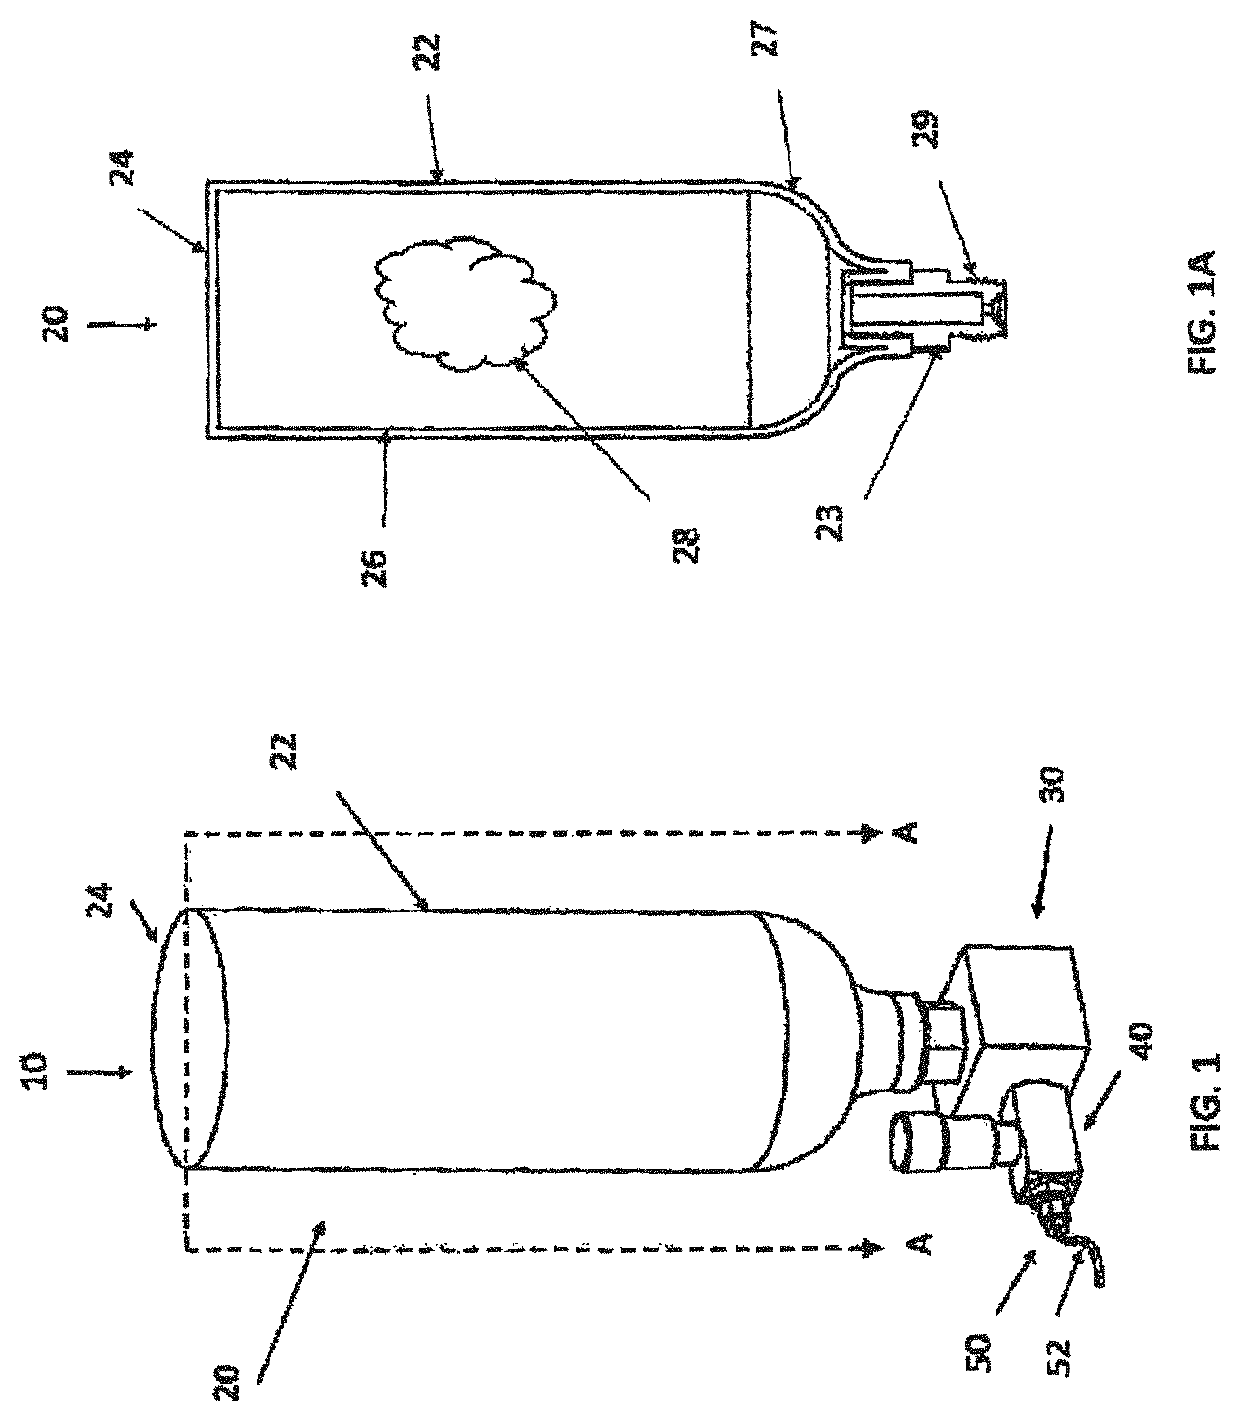 Portable instant cooling system with controlled temperature obtained through timed-release liquid or gaseous CO<sub>2 </sub>coolant for general refrigeration use in mobile and stationary containers